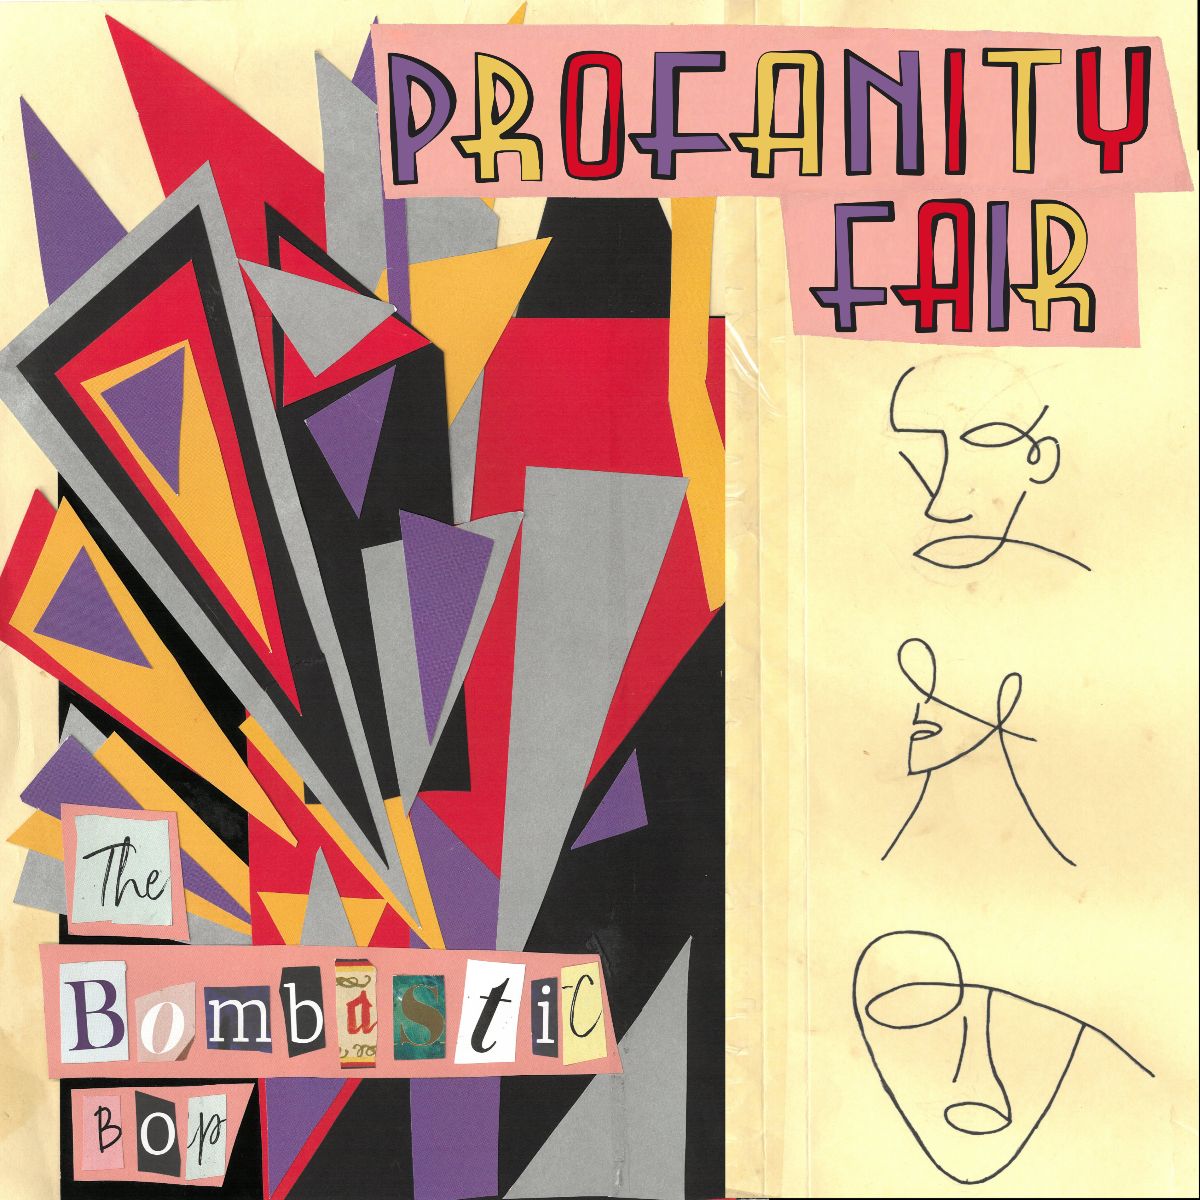 PROFANITY FAIR GIVE MODERN ROCK A NEW ANGLE WITH DEBUT ALBUM “THE BOMBASTIC BOP”